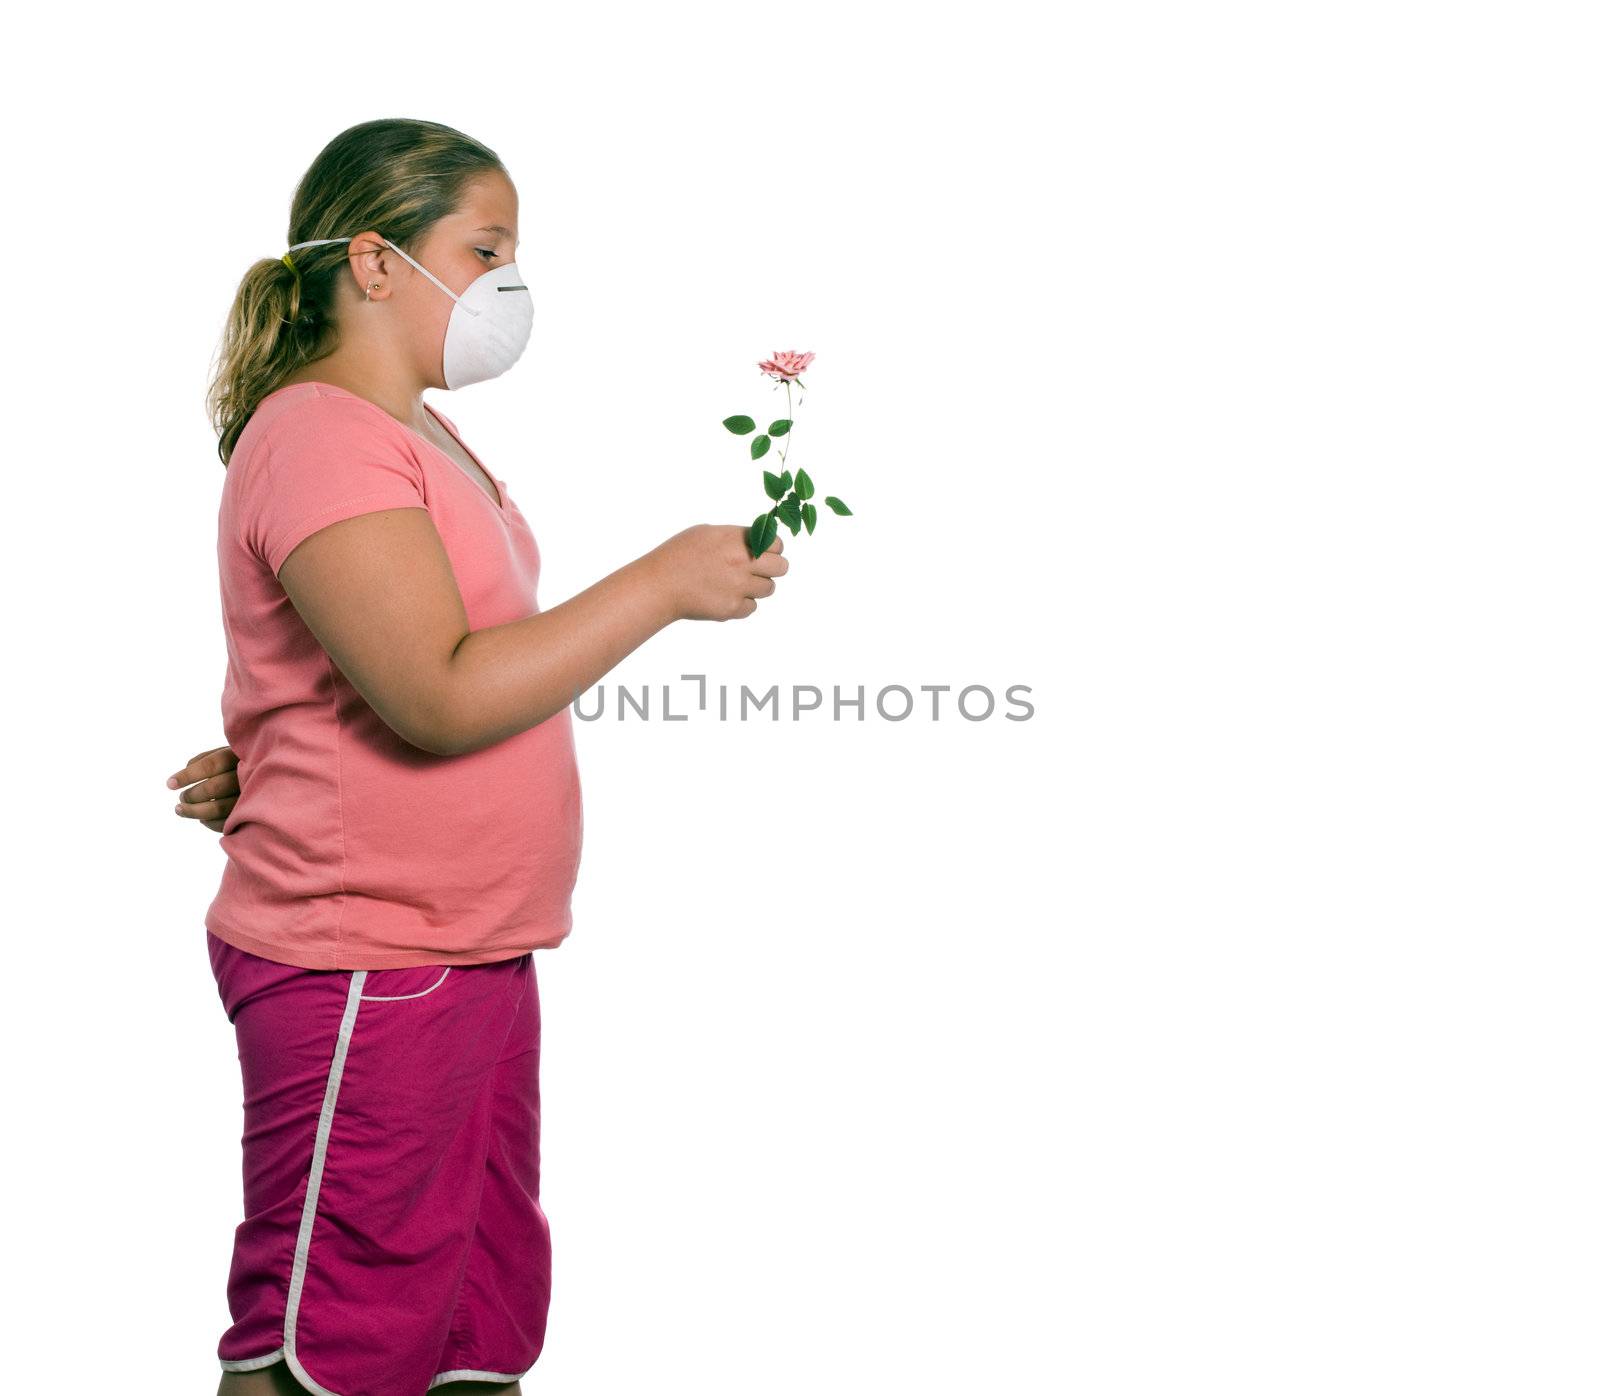 A young girl holding a flower while she wears a mask, isolated against a white background